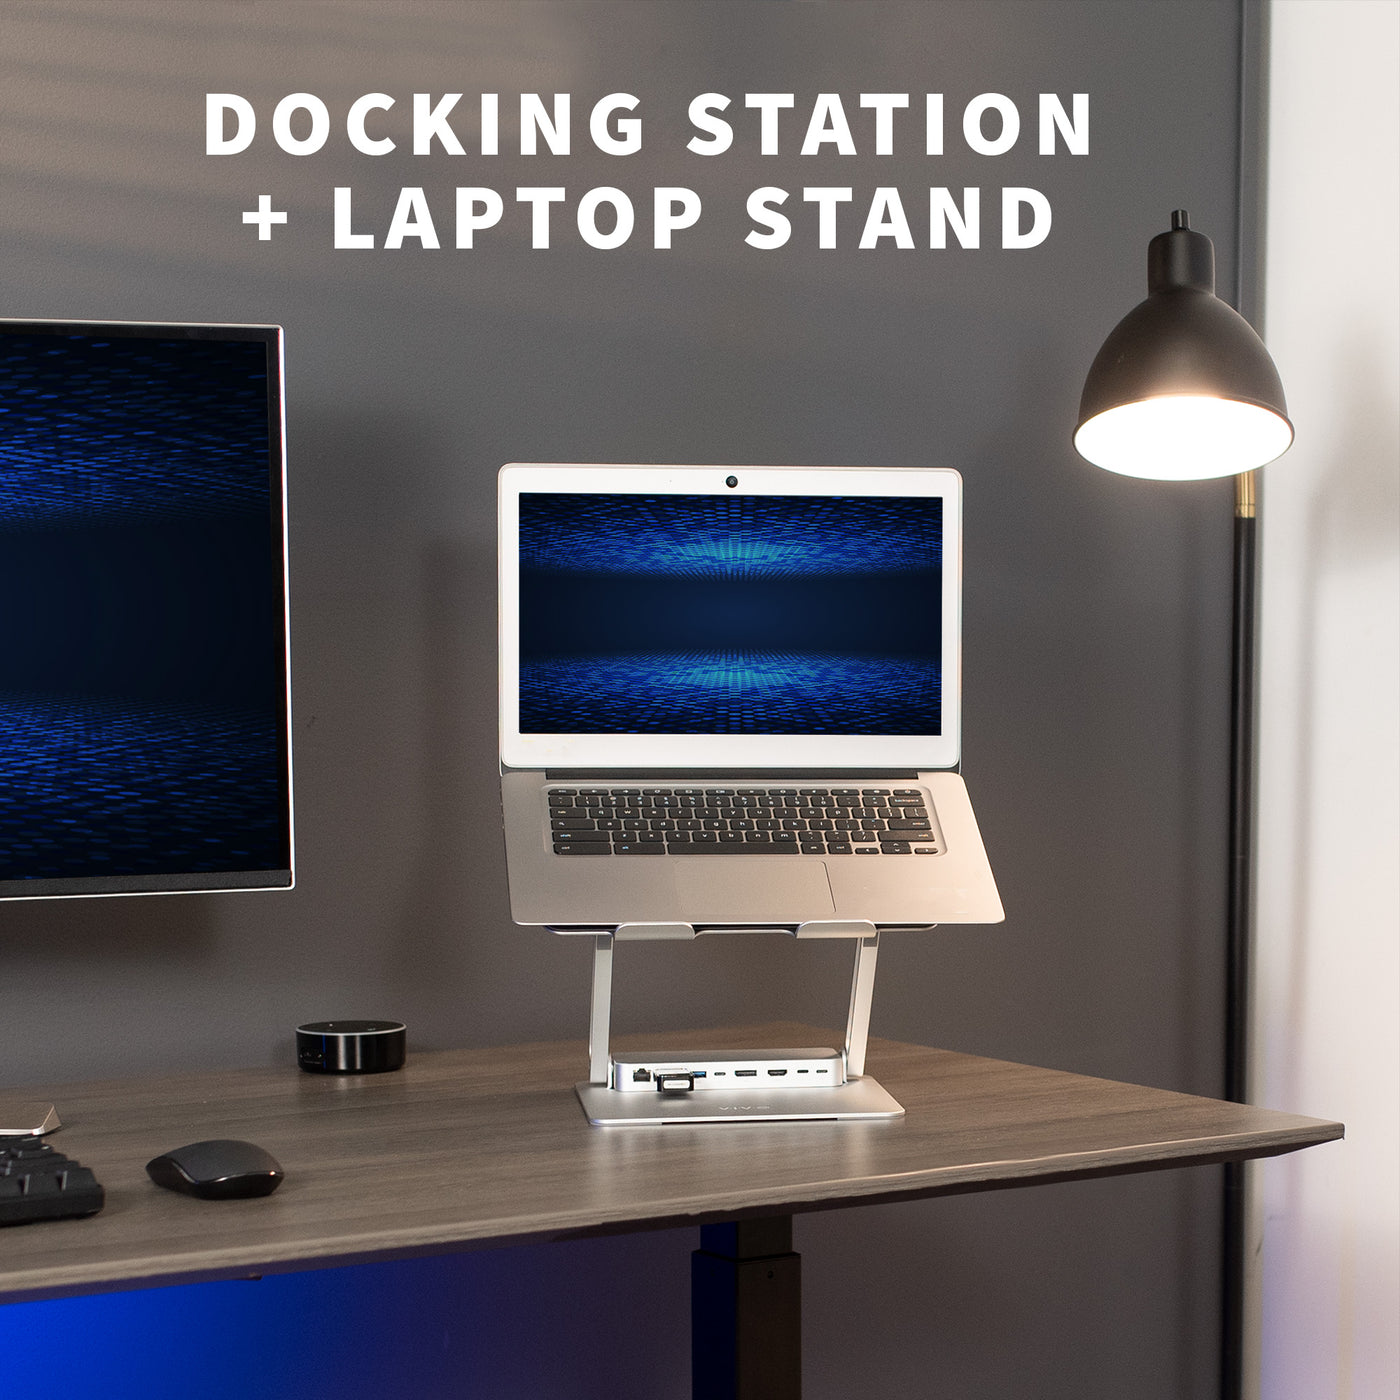 Eight cable docking station ports with a USB cable cord.